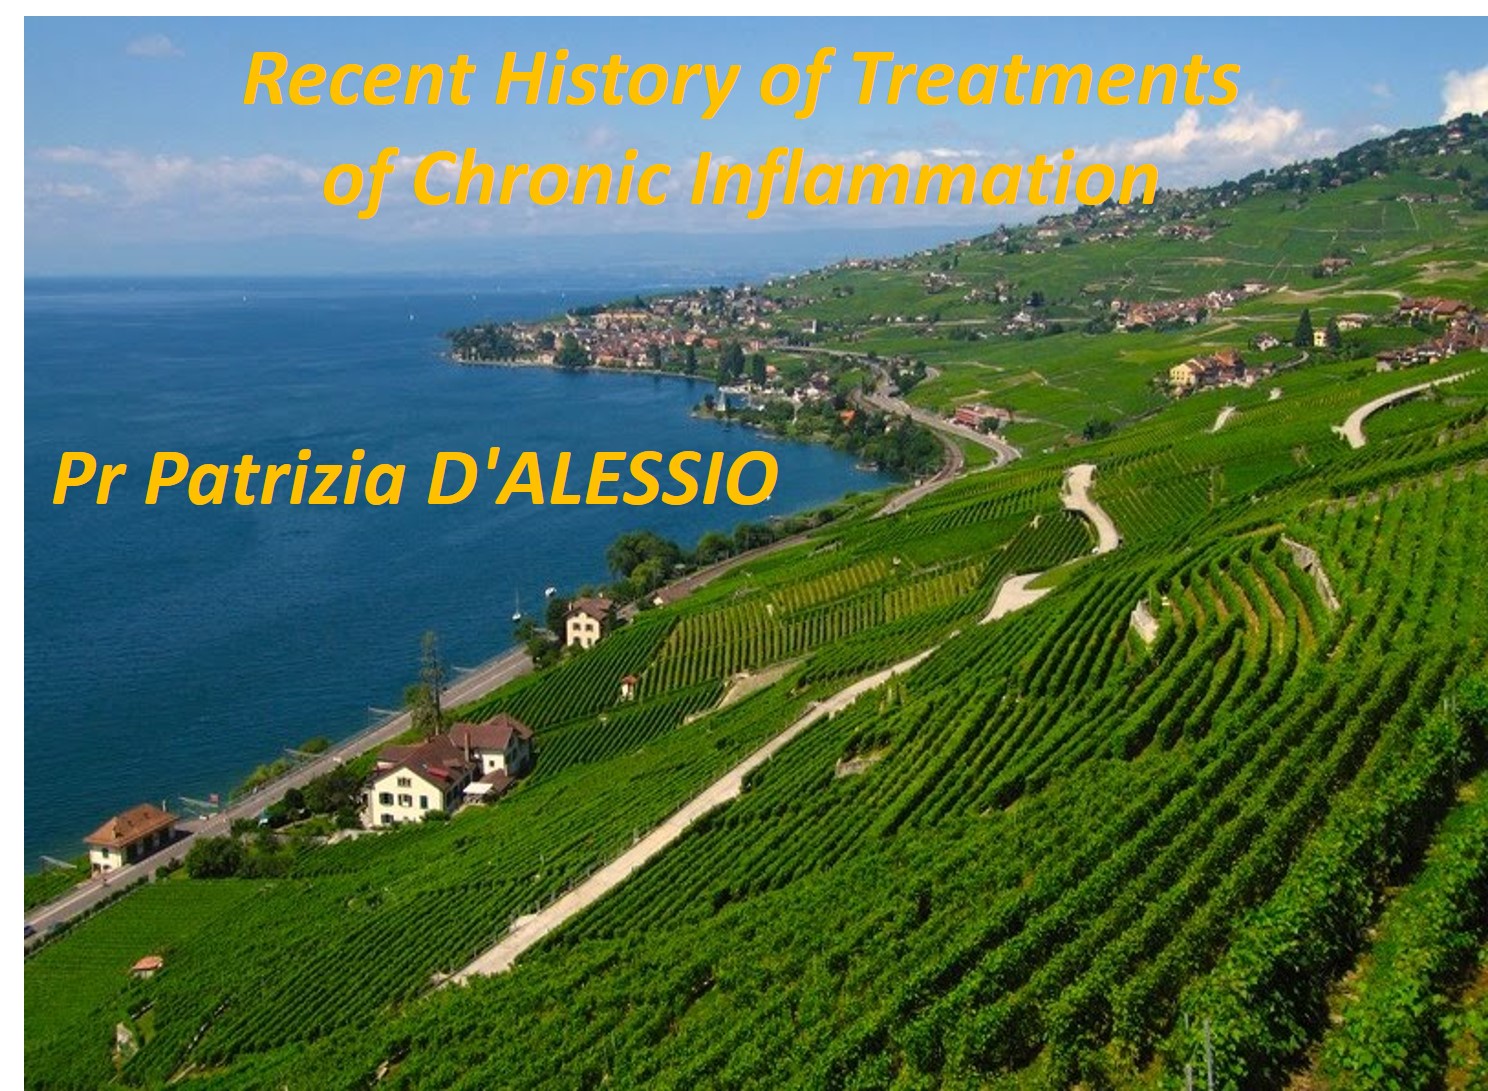 Recent history of Treatments of Chronic Inflammation   -   Pr Patrizia D'ALESSIO